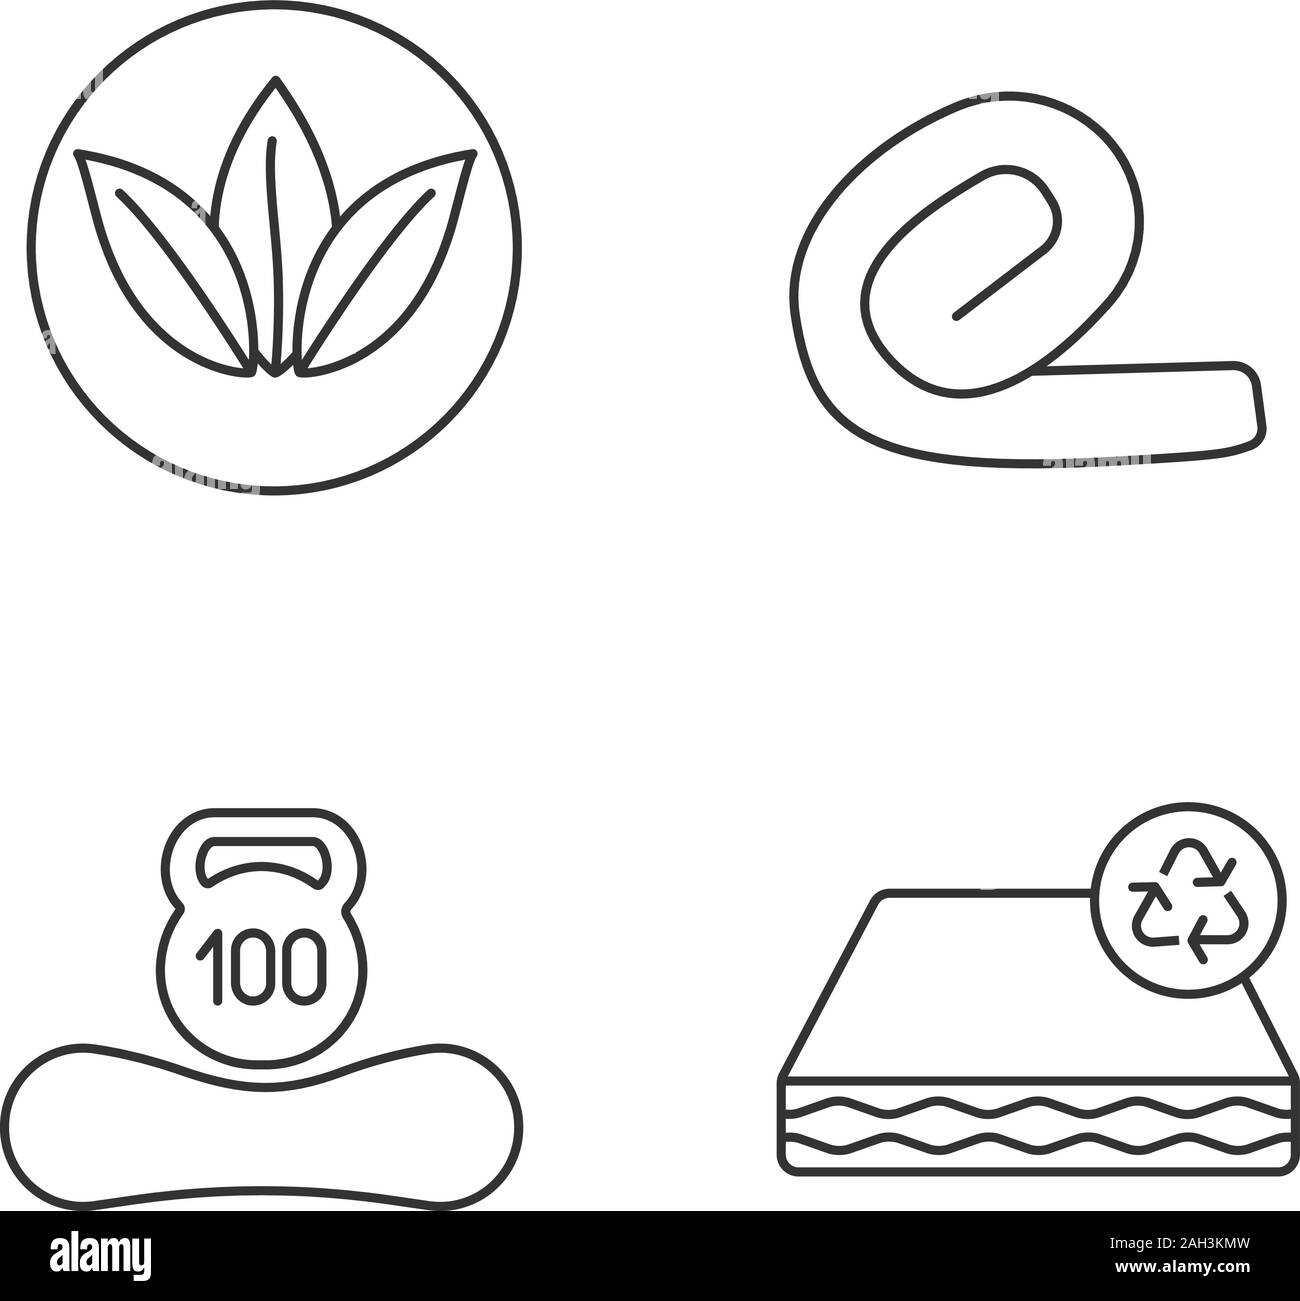 Orthopedic mattress linear icons set. Ecological, recyclable and reusable property, weight limit, springless roll up mattress. Thin line symbols. Isol Stock Vector